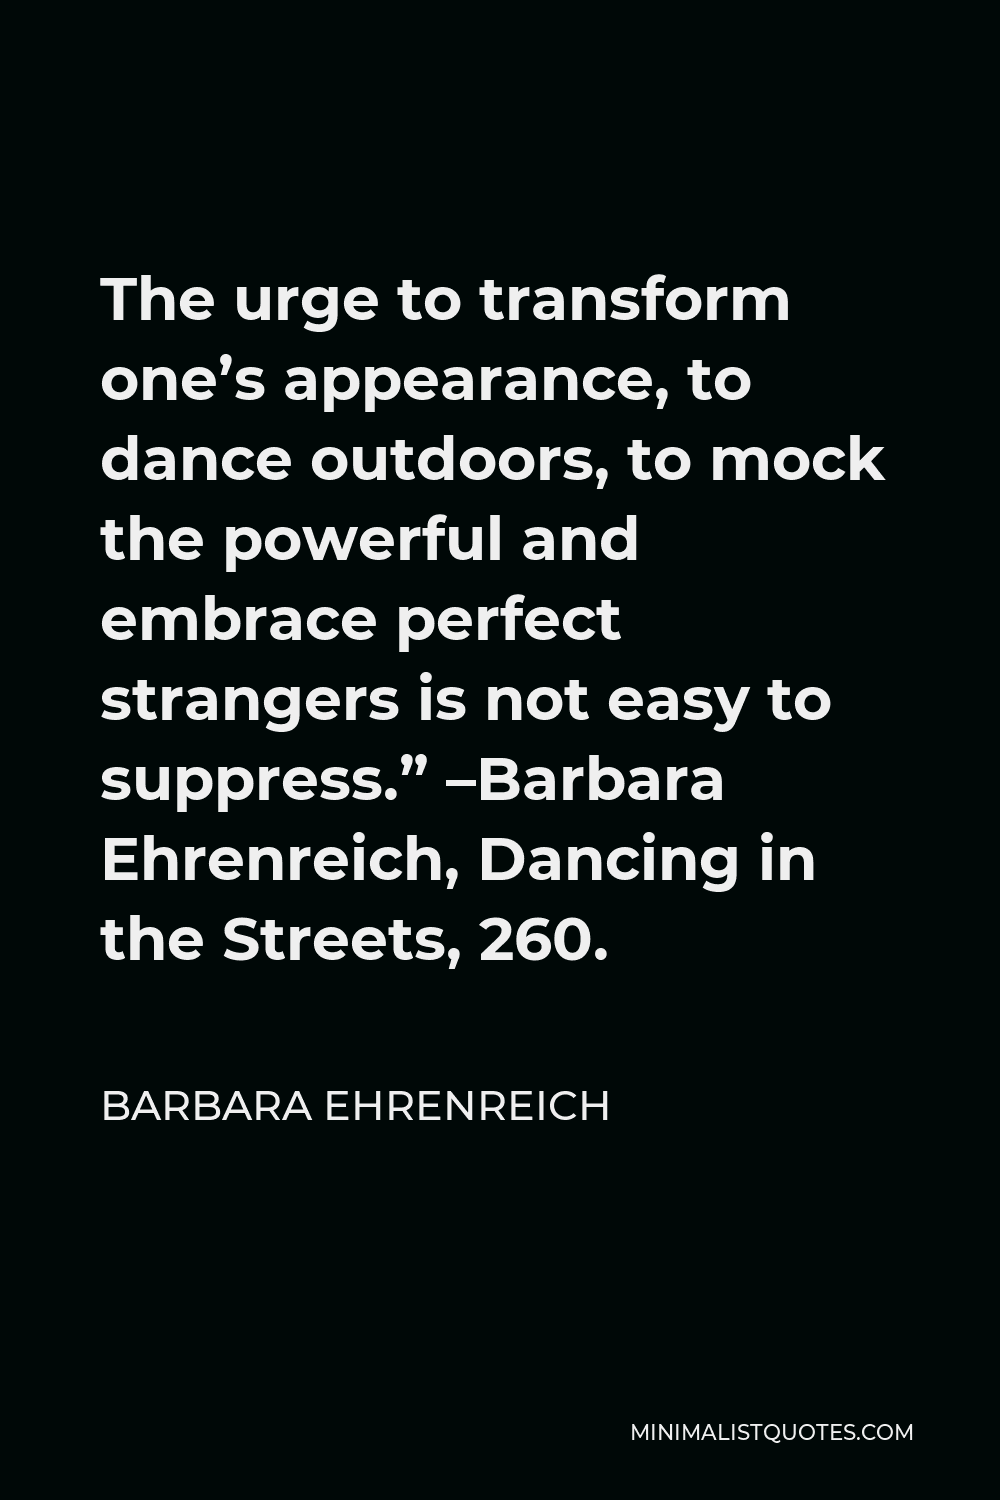 Barbara Ehrenreich Quote - The urge to transform one’s appearance, to dance outdoors, to mock the powerful and embrace perfect strangers is not easy to suppress.” –Barbara Ehrenreich, Dancing in the Streets, 260.